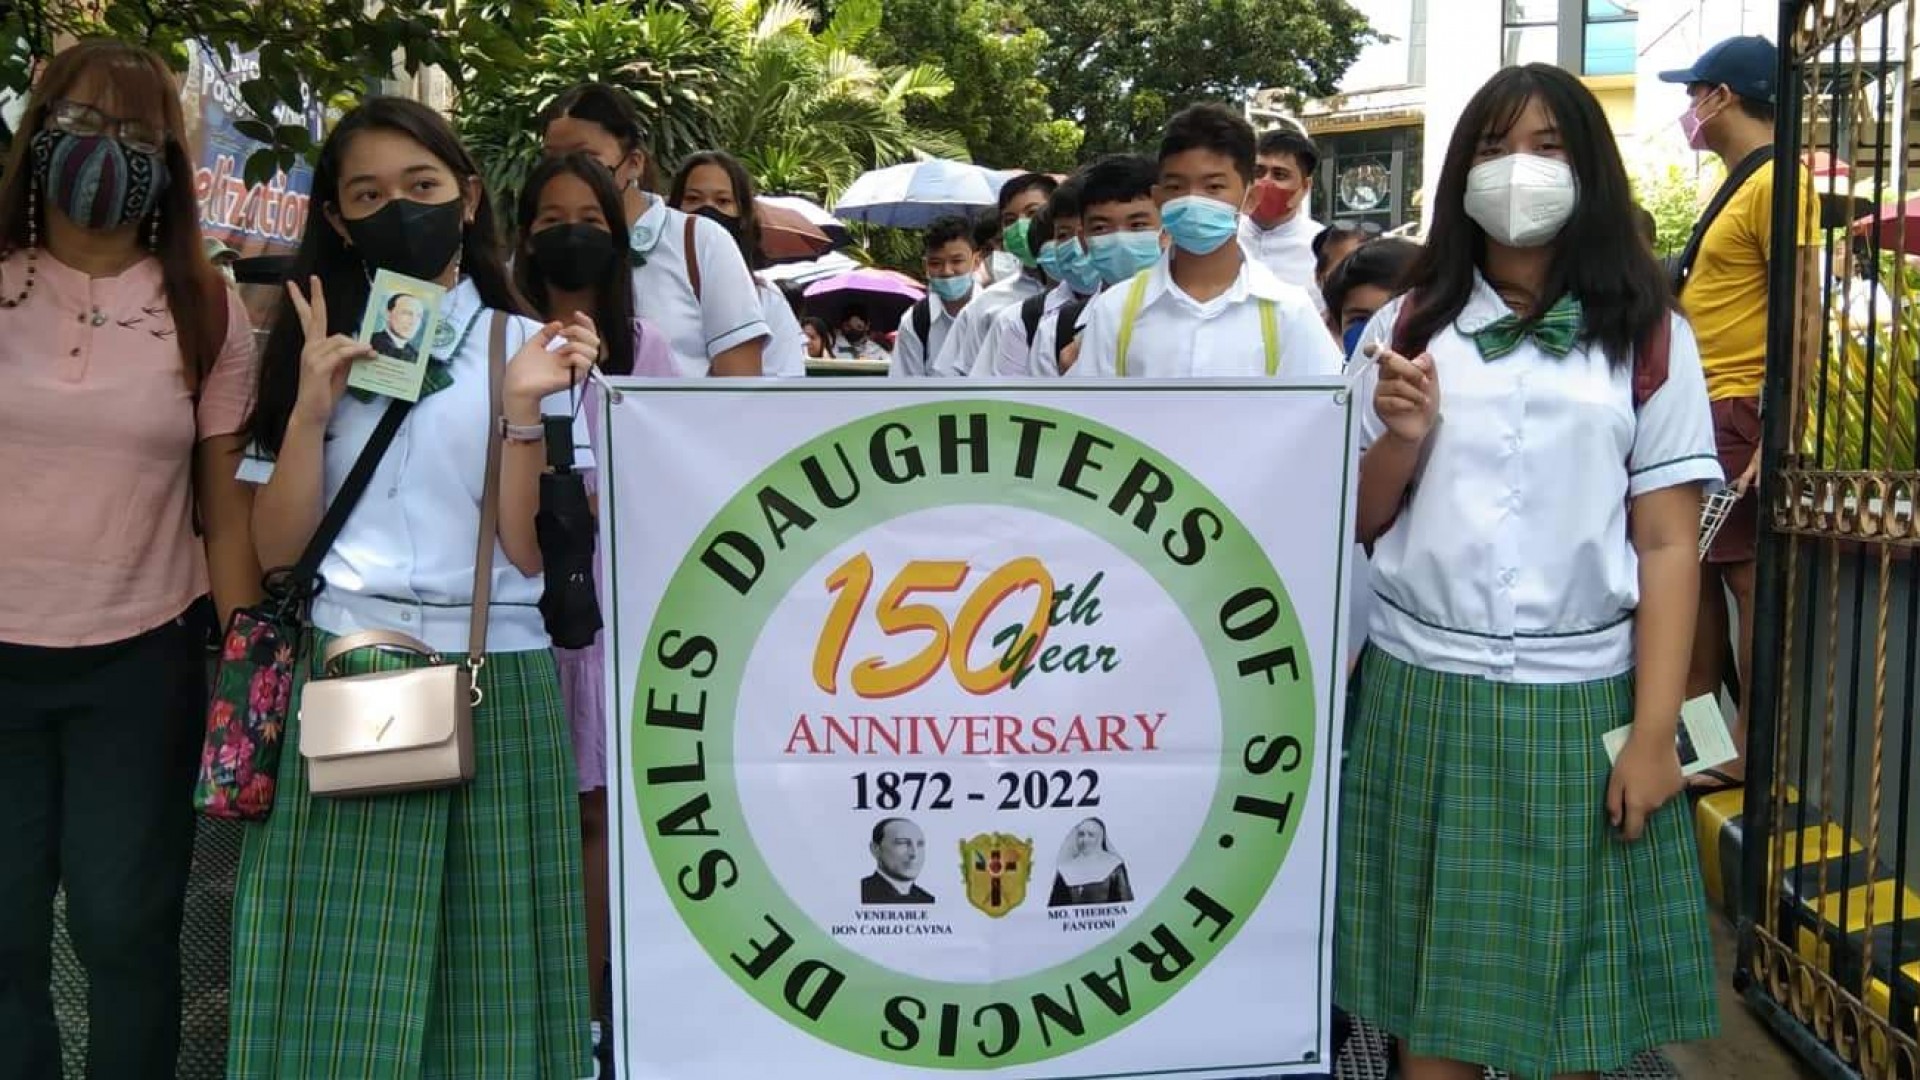 Celebration of 150th anniversary of the Foundation